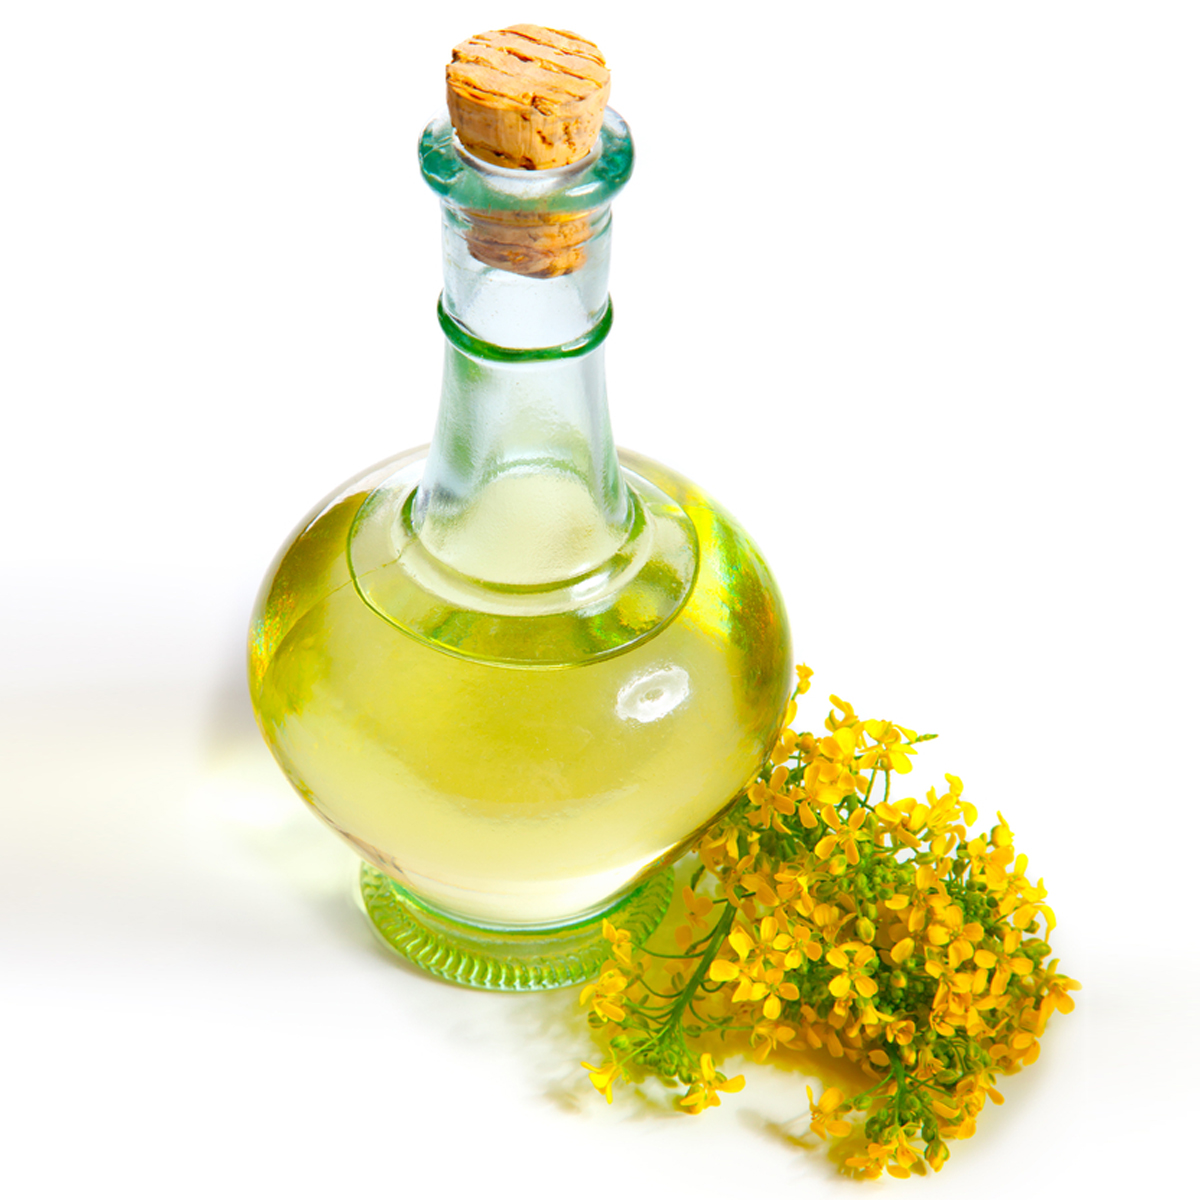 A bottle of canola oil with a sprig of canola flowers beside it.